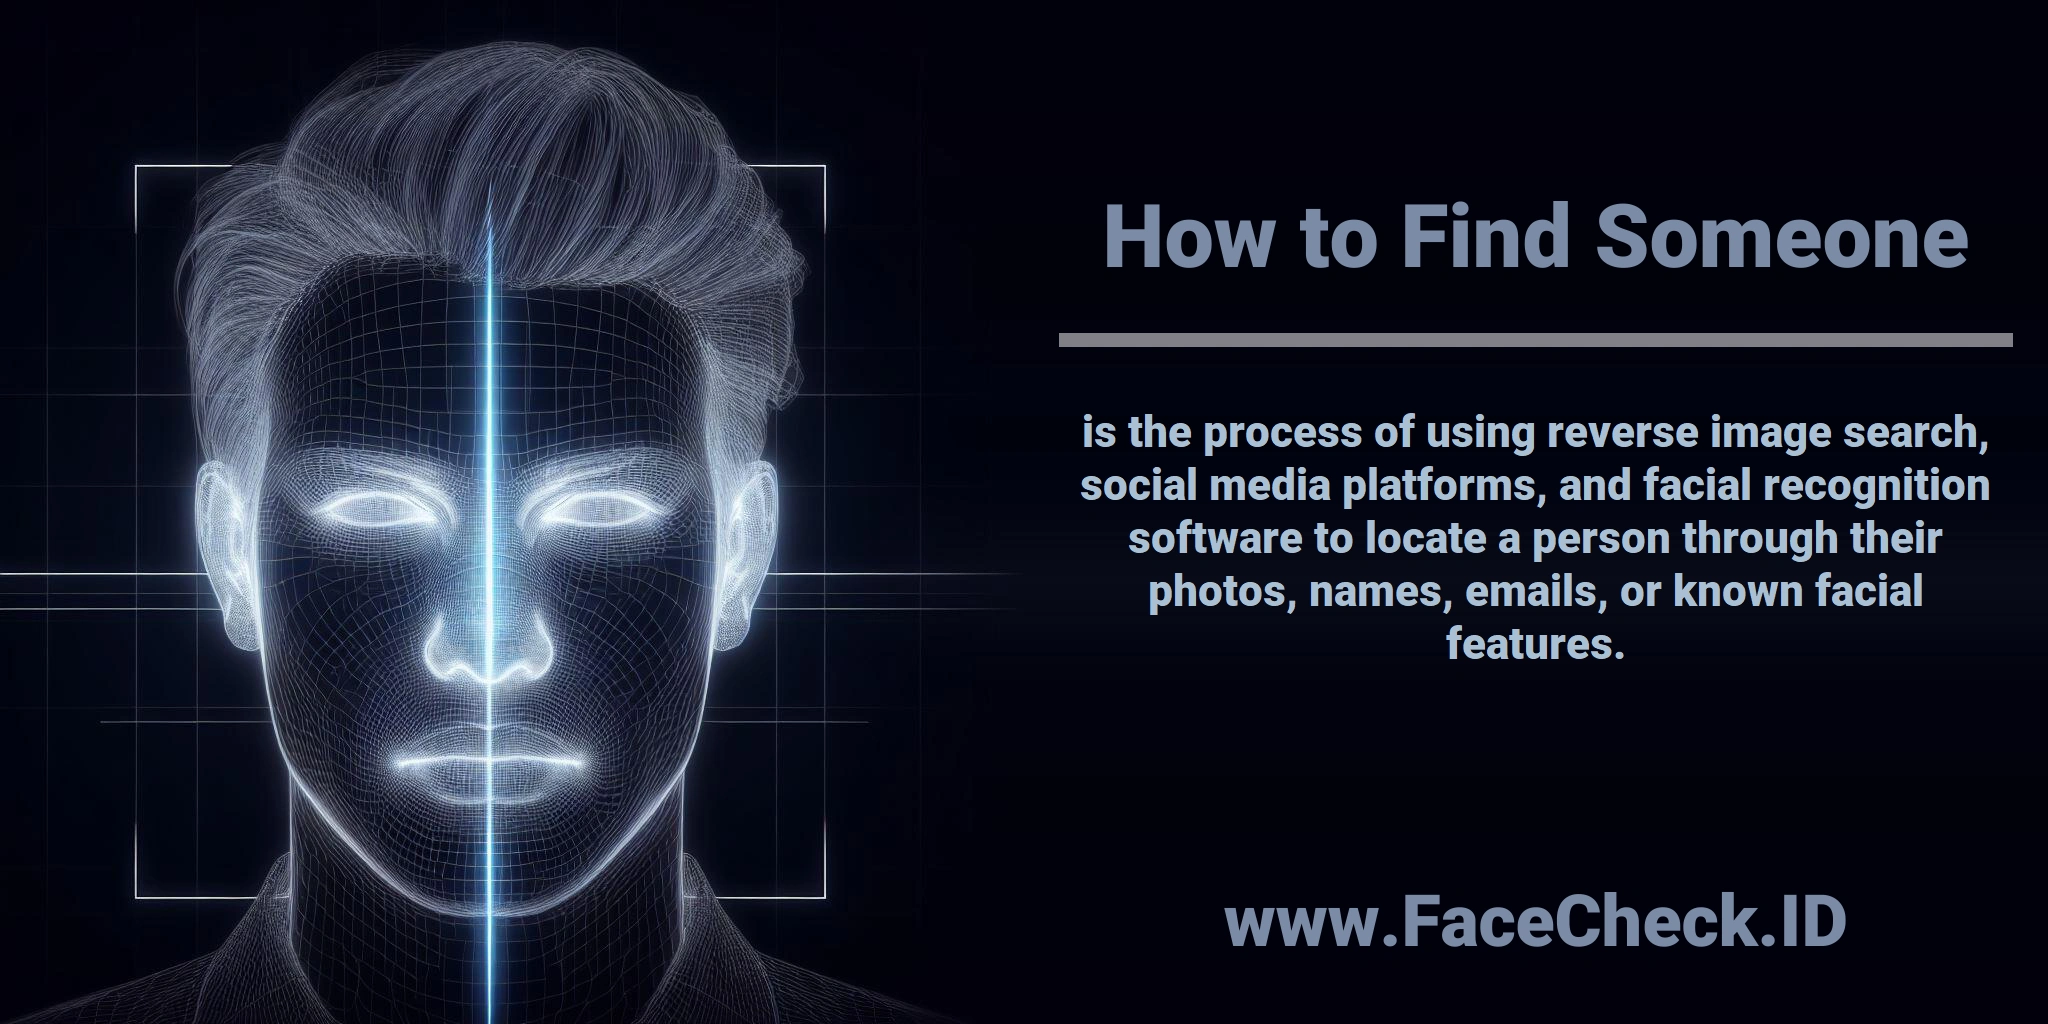 <b>How to Find Someone</b> is the process of using reverse image search, social media platforms, and facial recognition software to locate a person through their photos, names, emails, or known facial features.